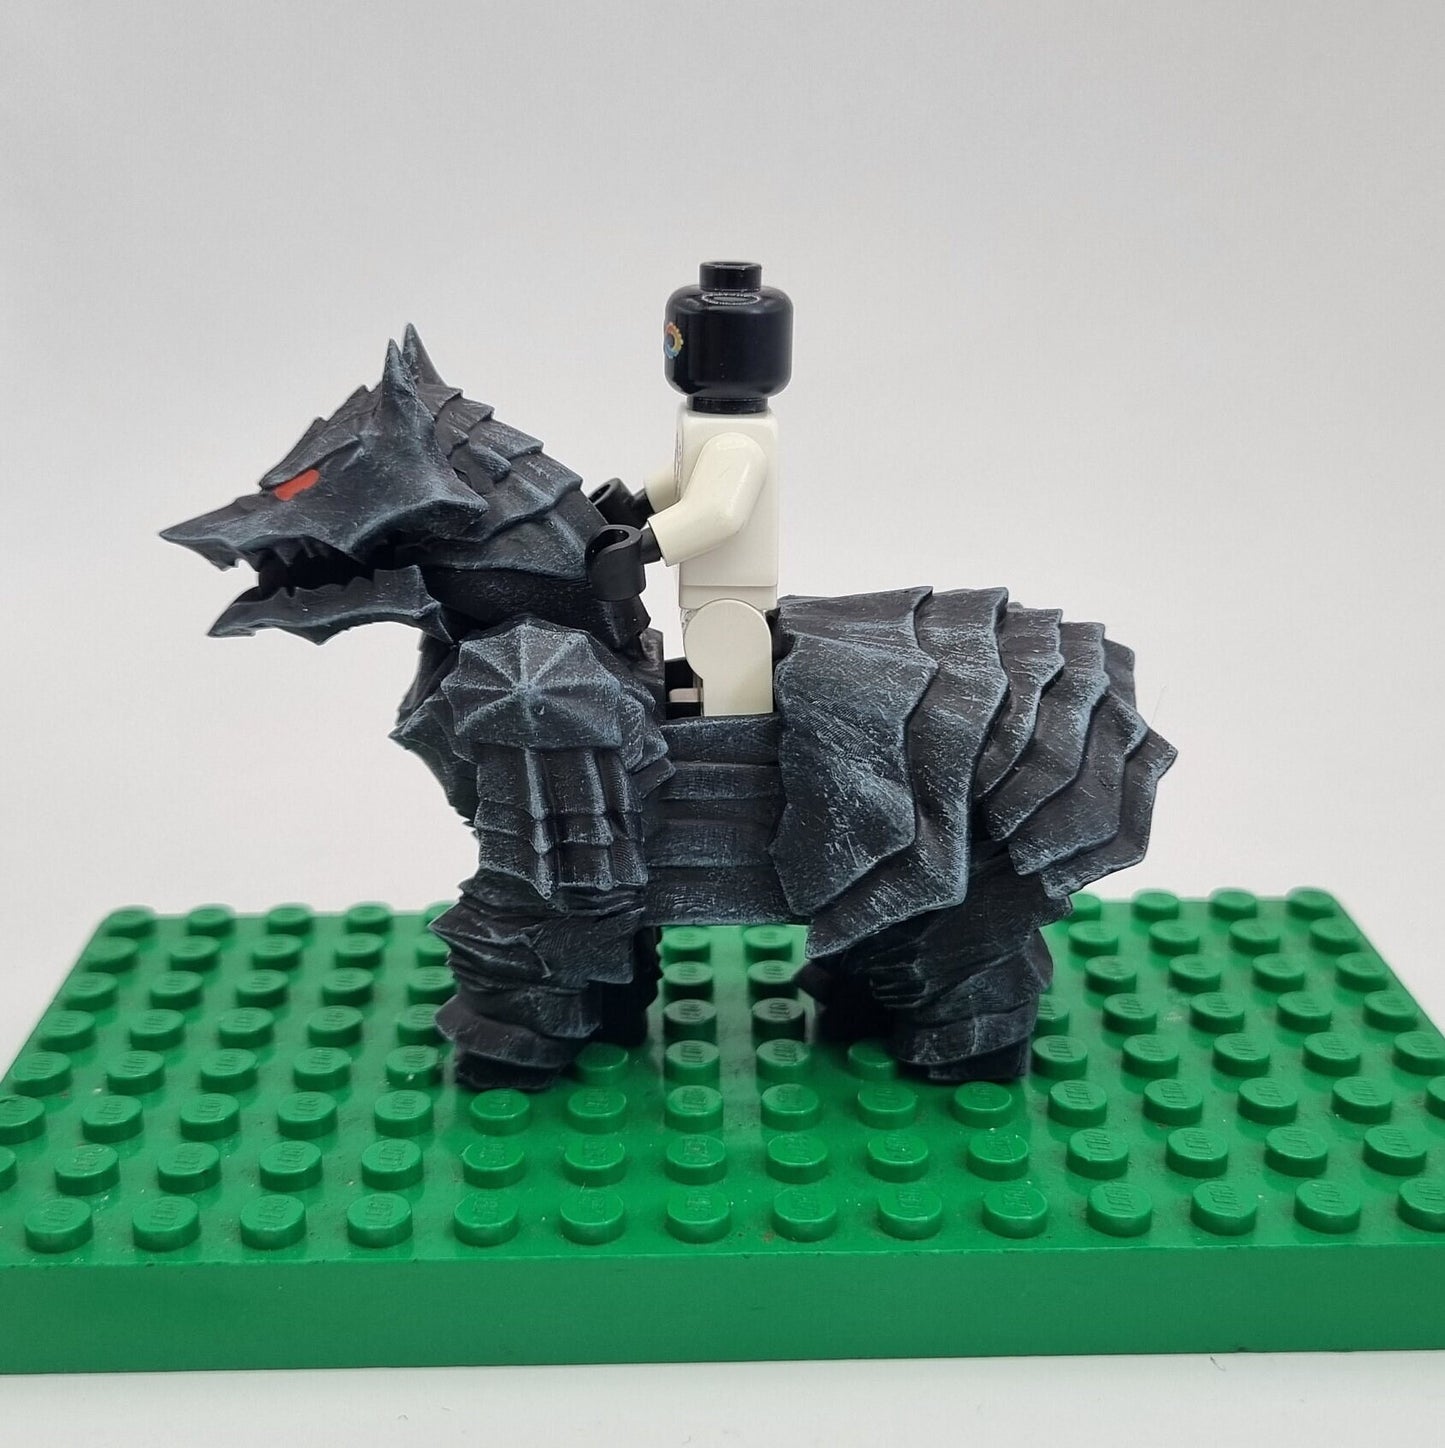 Building toy custom 3D printed painted armored horse!